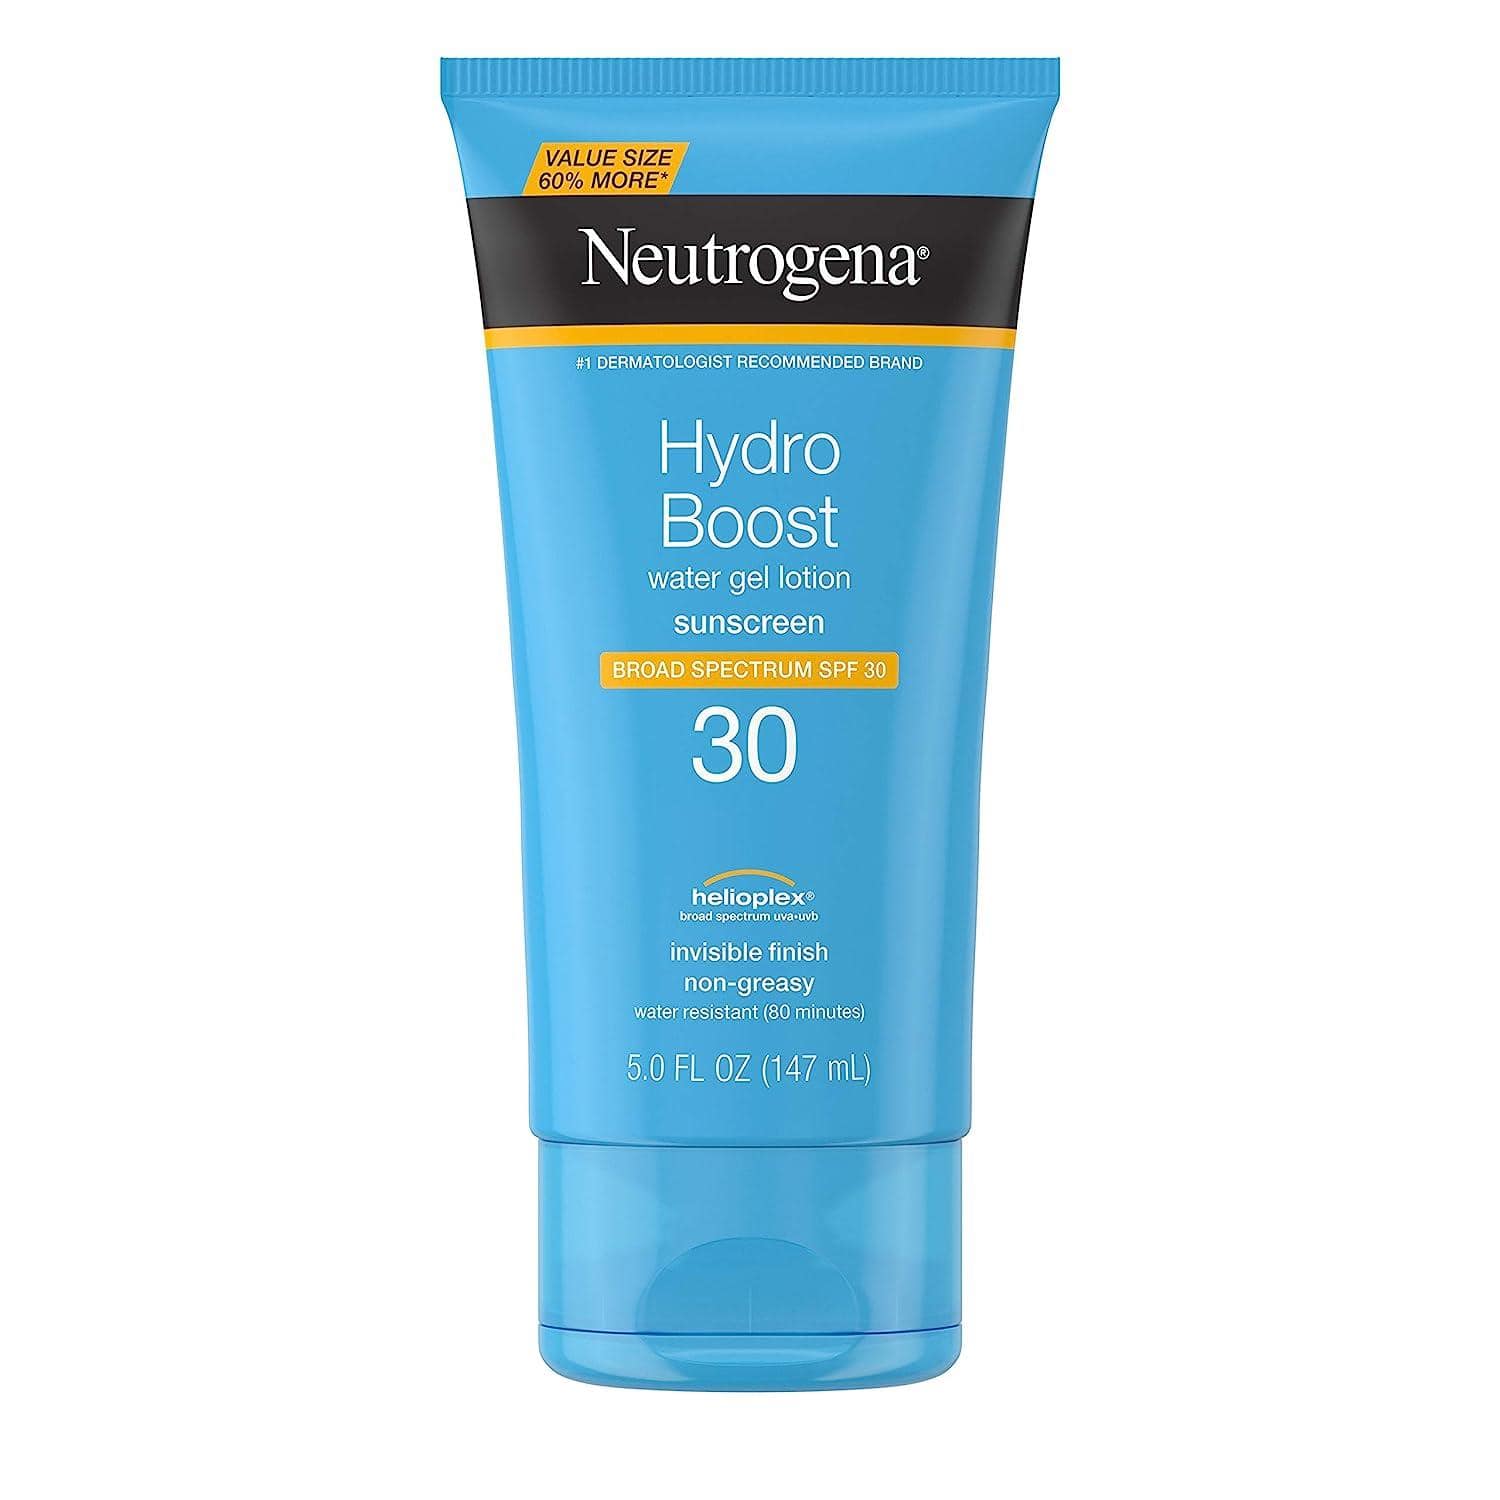 Neutrogena Hydro Boost Sunscreen is my choice: SPF 30, hydrating gel-cream for face and body. Affordable, quality sunscreen for oily skin.
